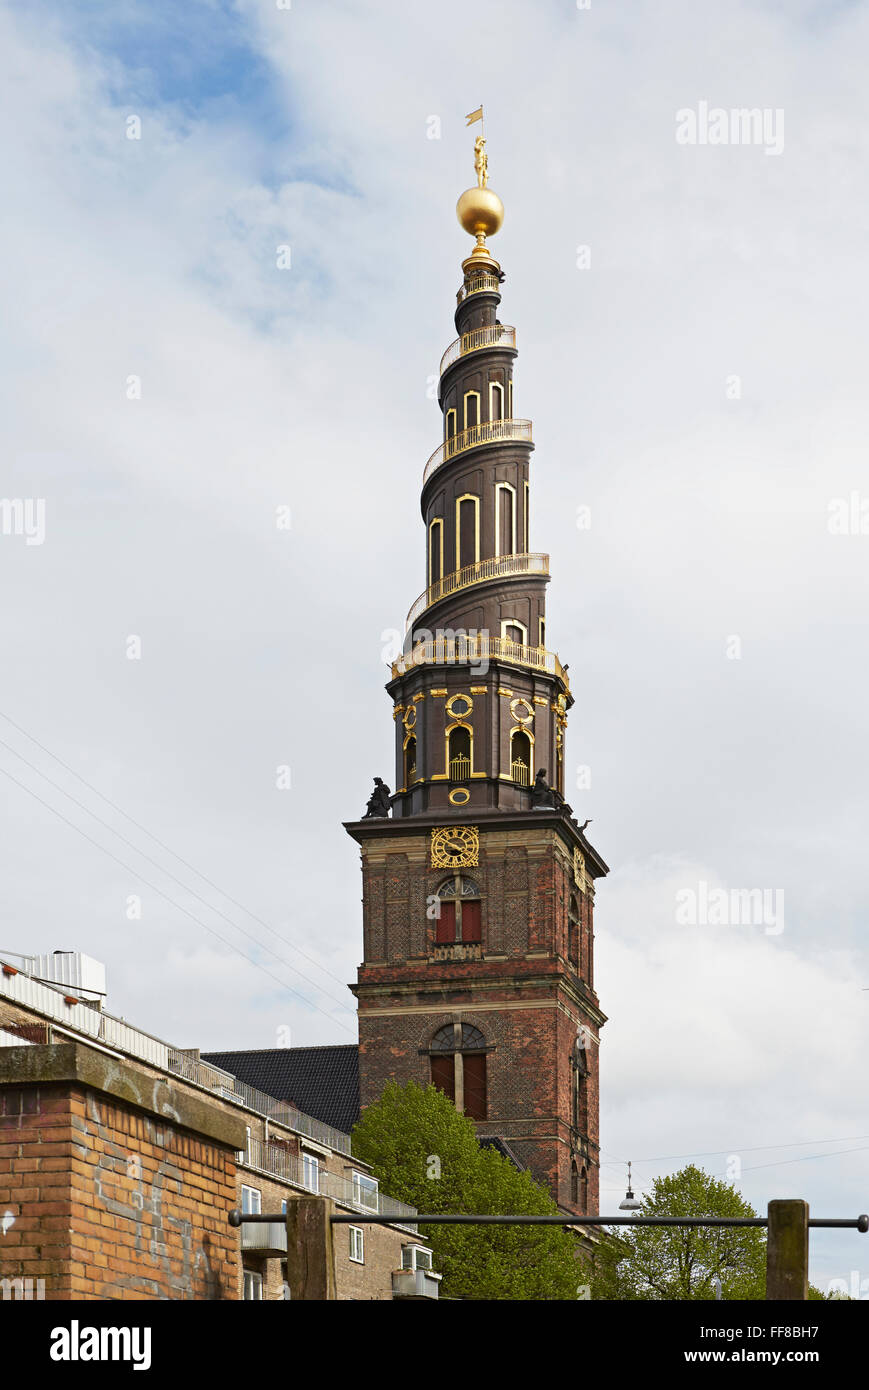 Copenhagen Church of Our Saviour with a helix spire Stock Photo